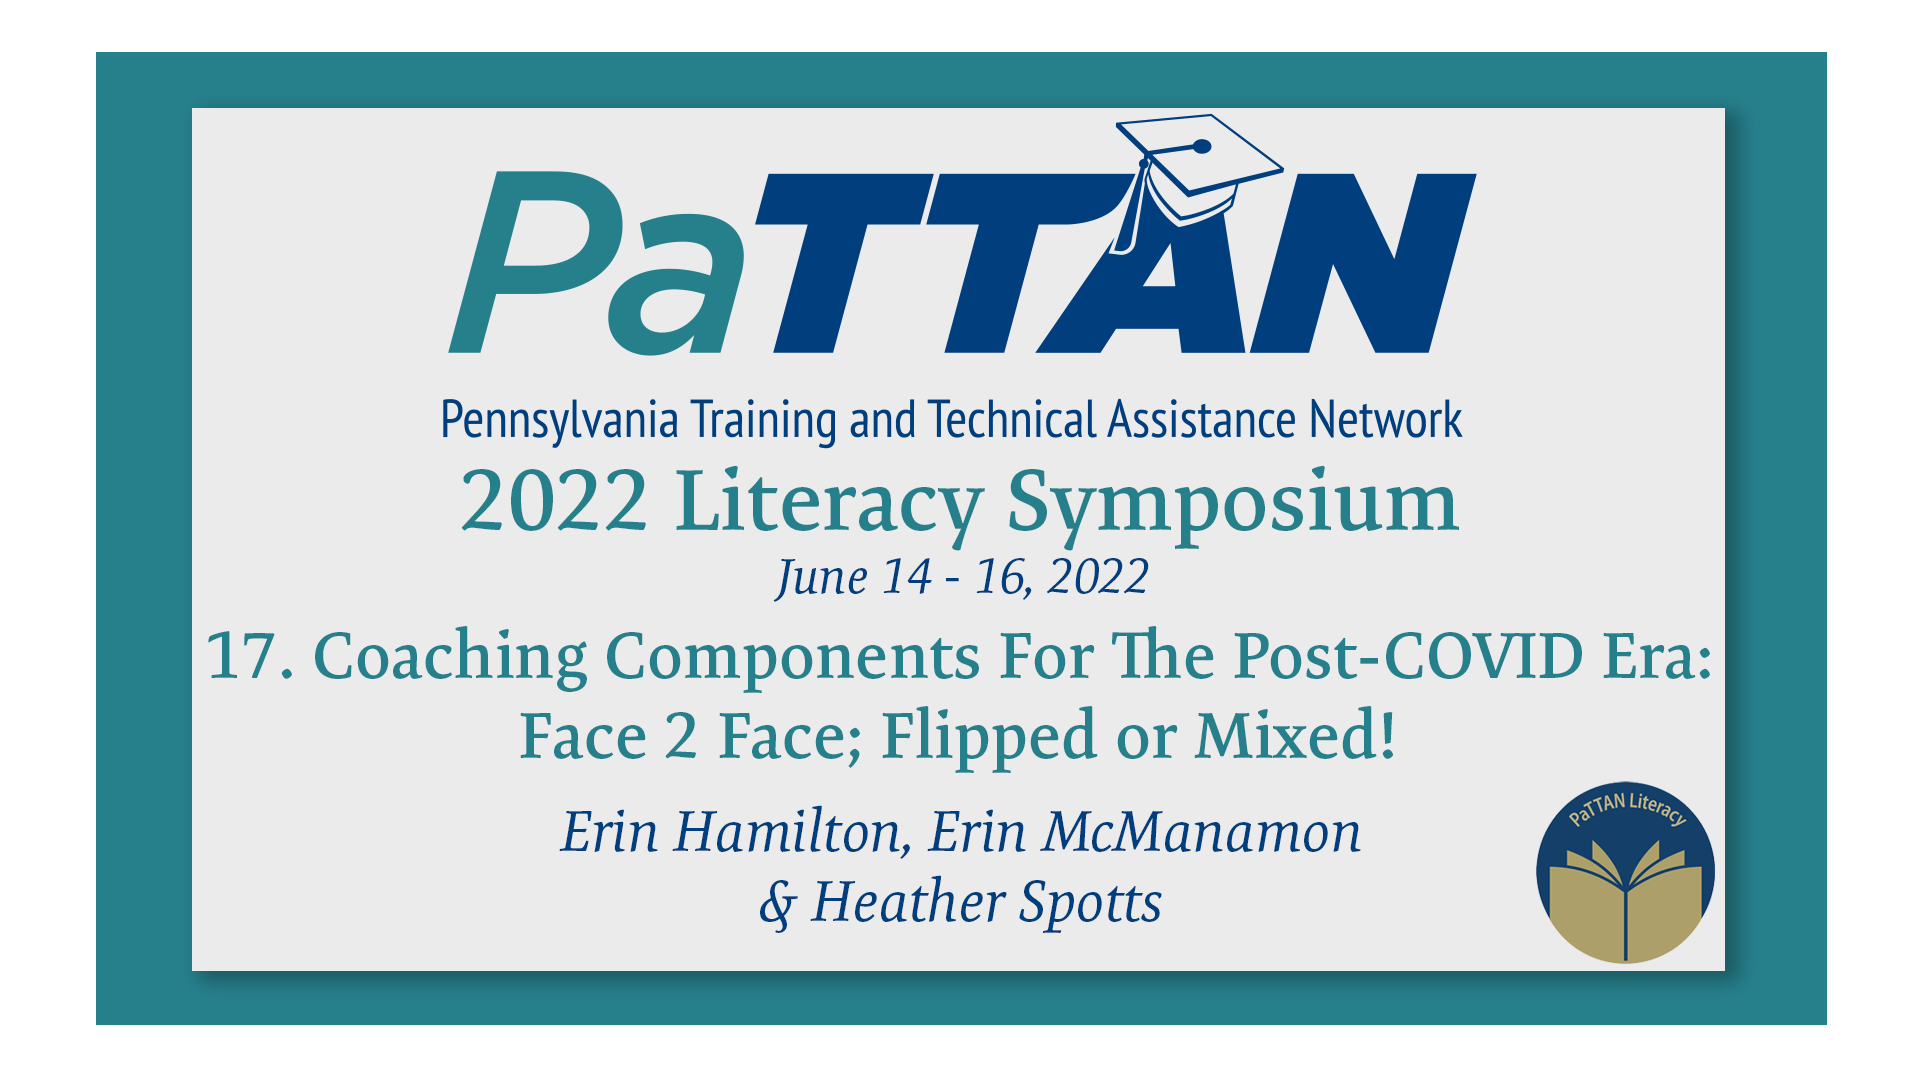 17. Coaching Components For The Post-COVID Era | 2022 Literacy Symposium